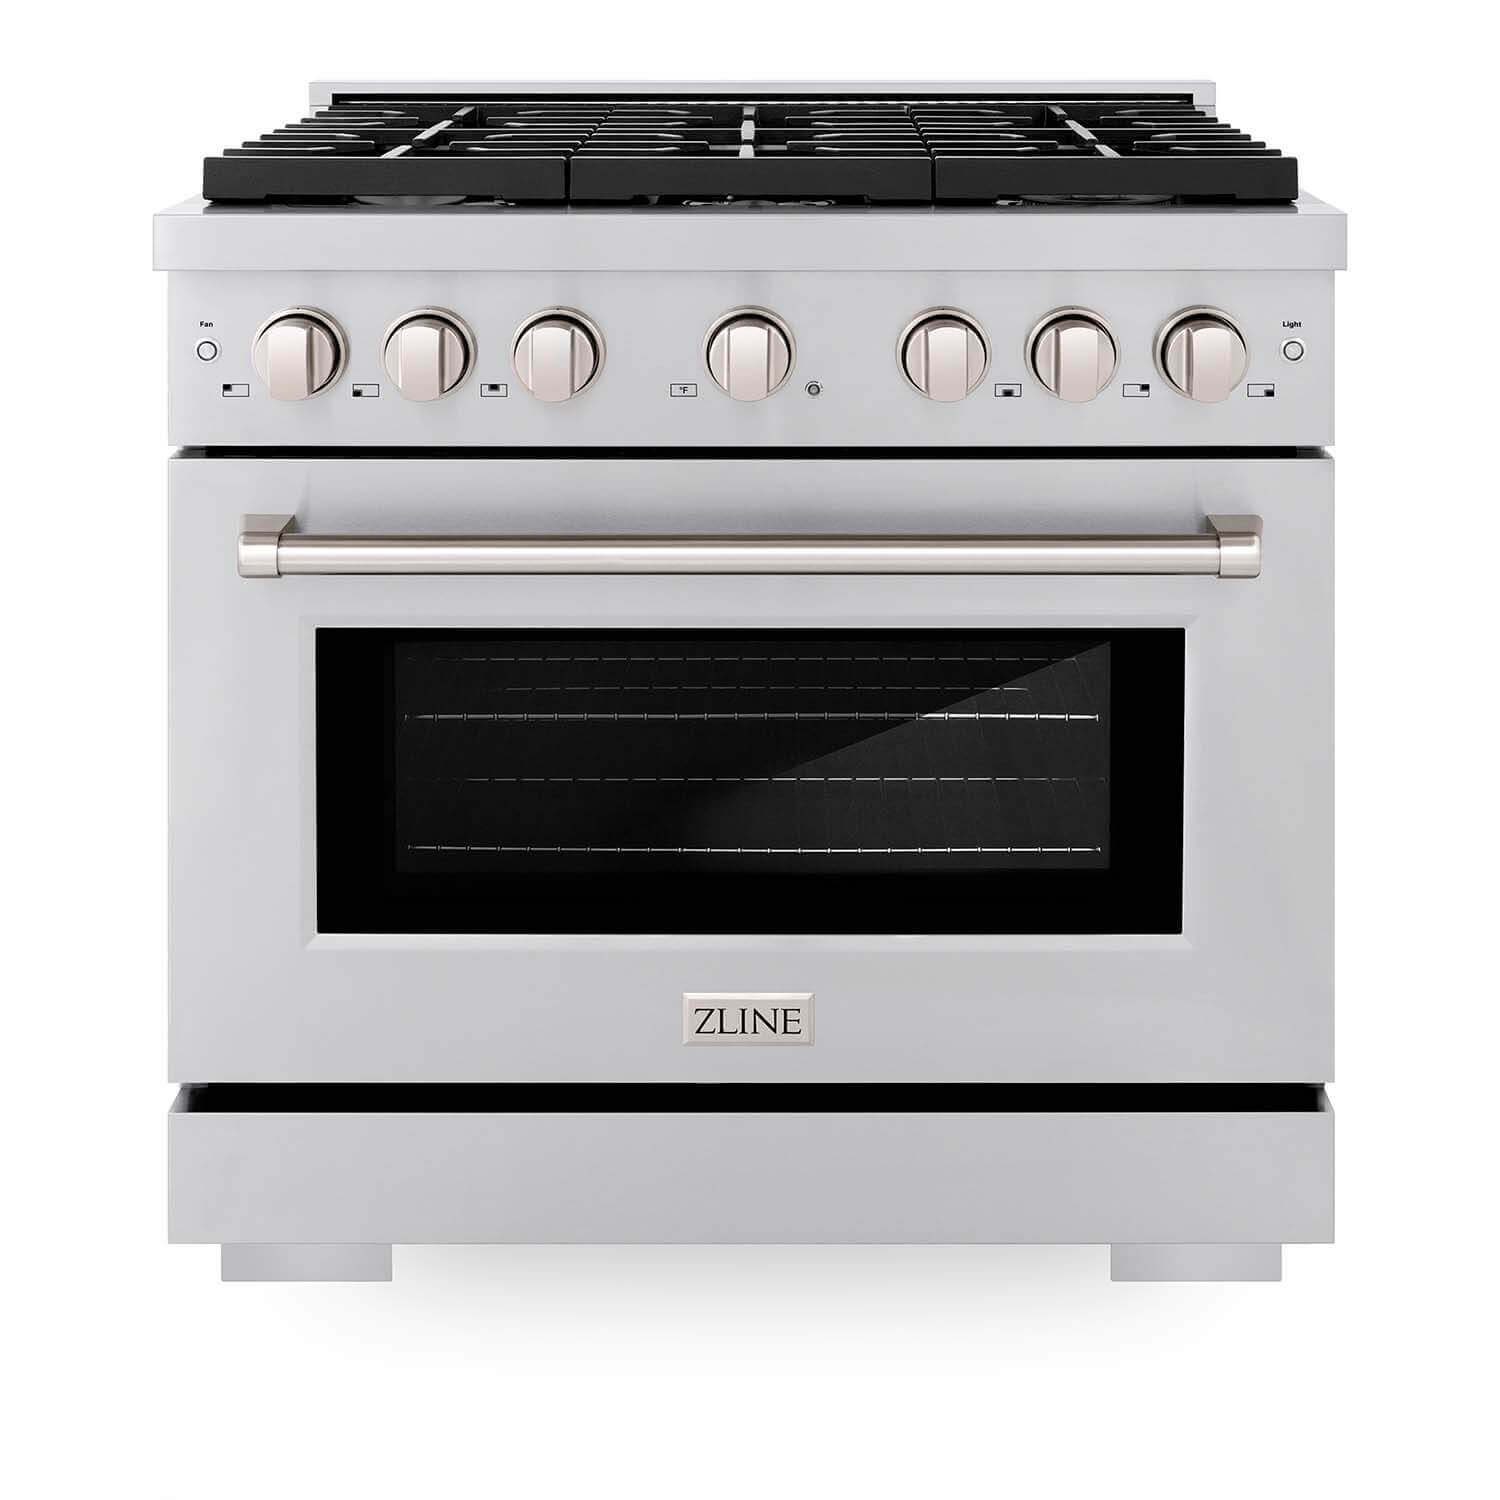 ZLINE 36 in. 5.2 cu. ft. 6 Burner Gas Range with Convection Gas Oven in Stainless Steel (SGR36) front, oven closed.